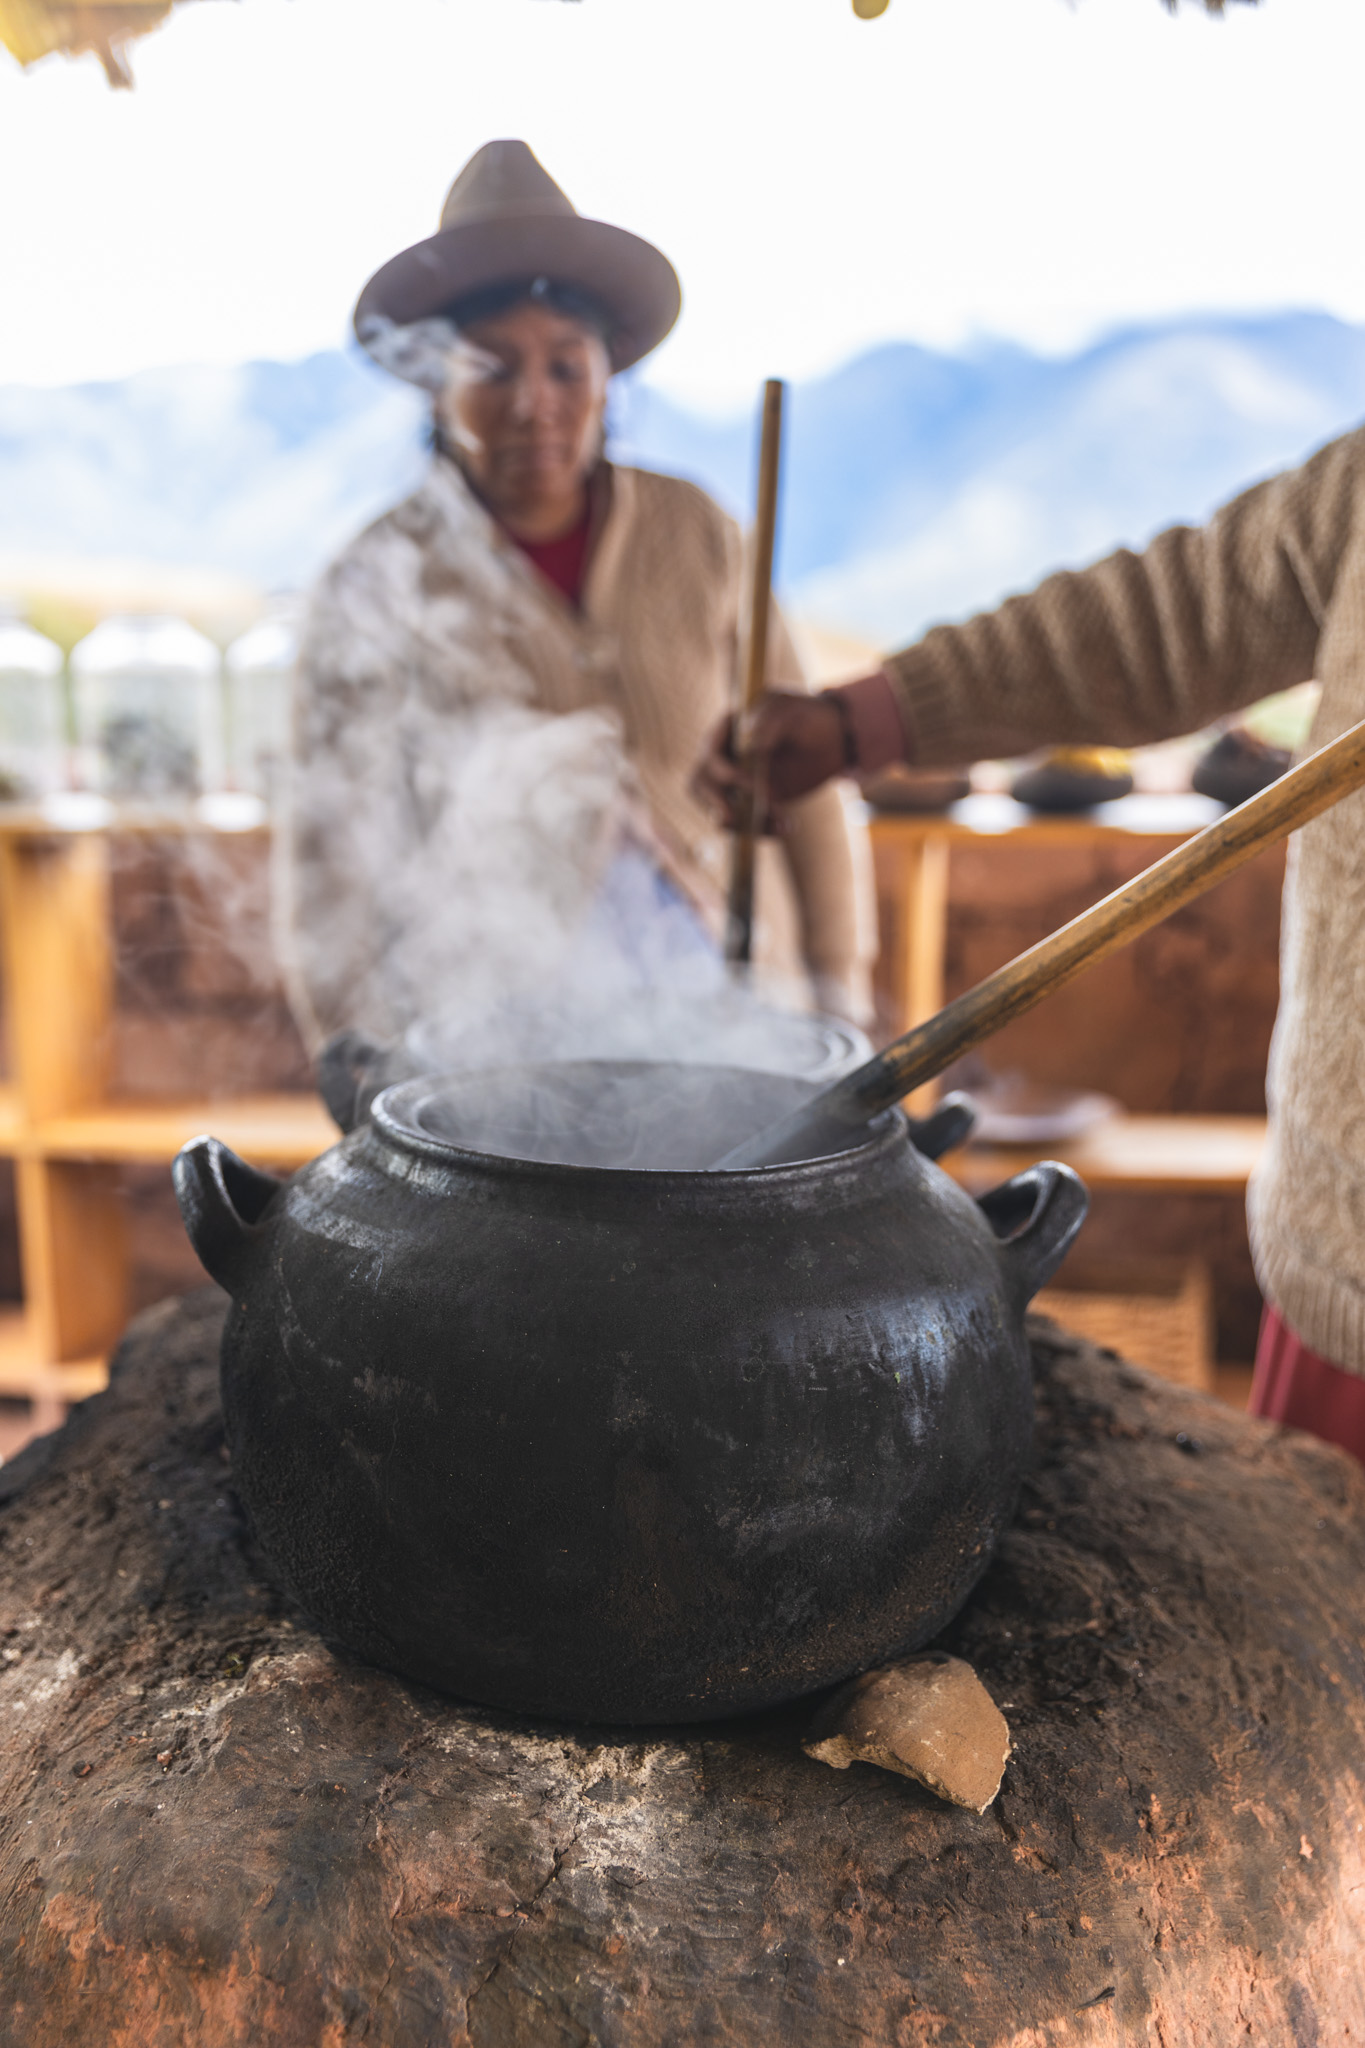 A hot cauldron for dying textiles